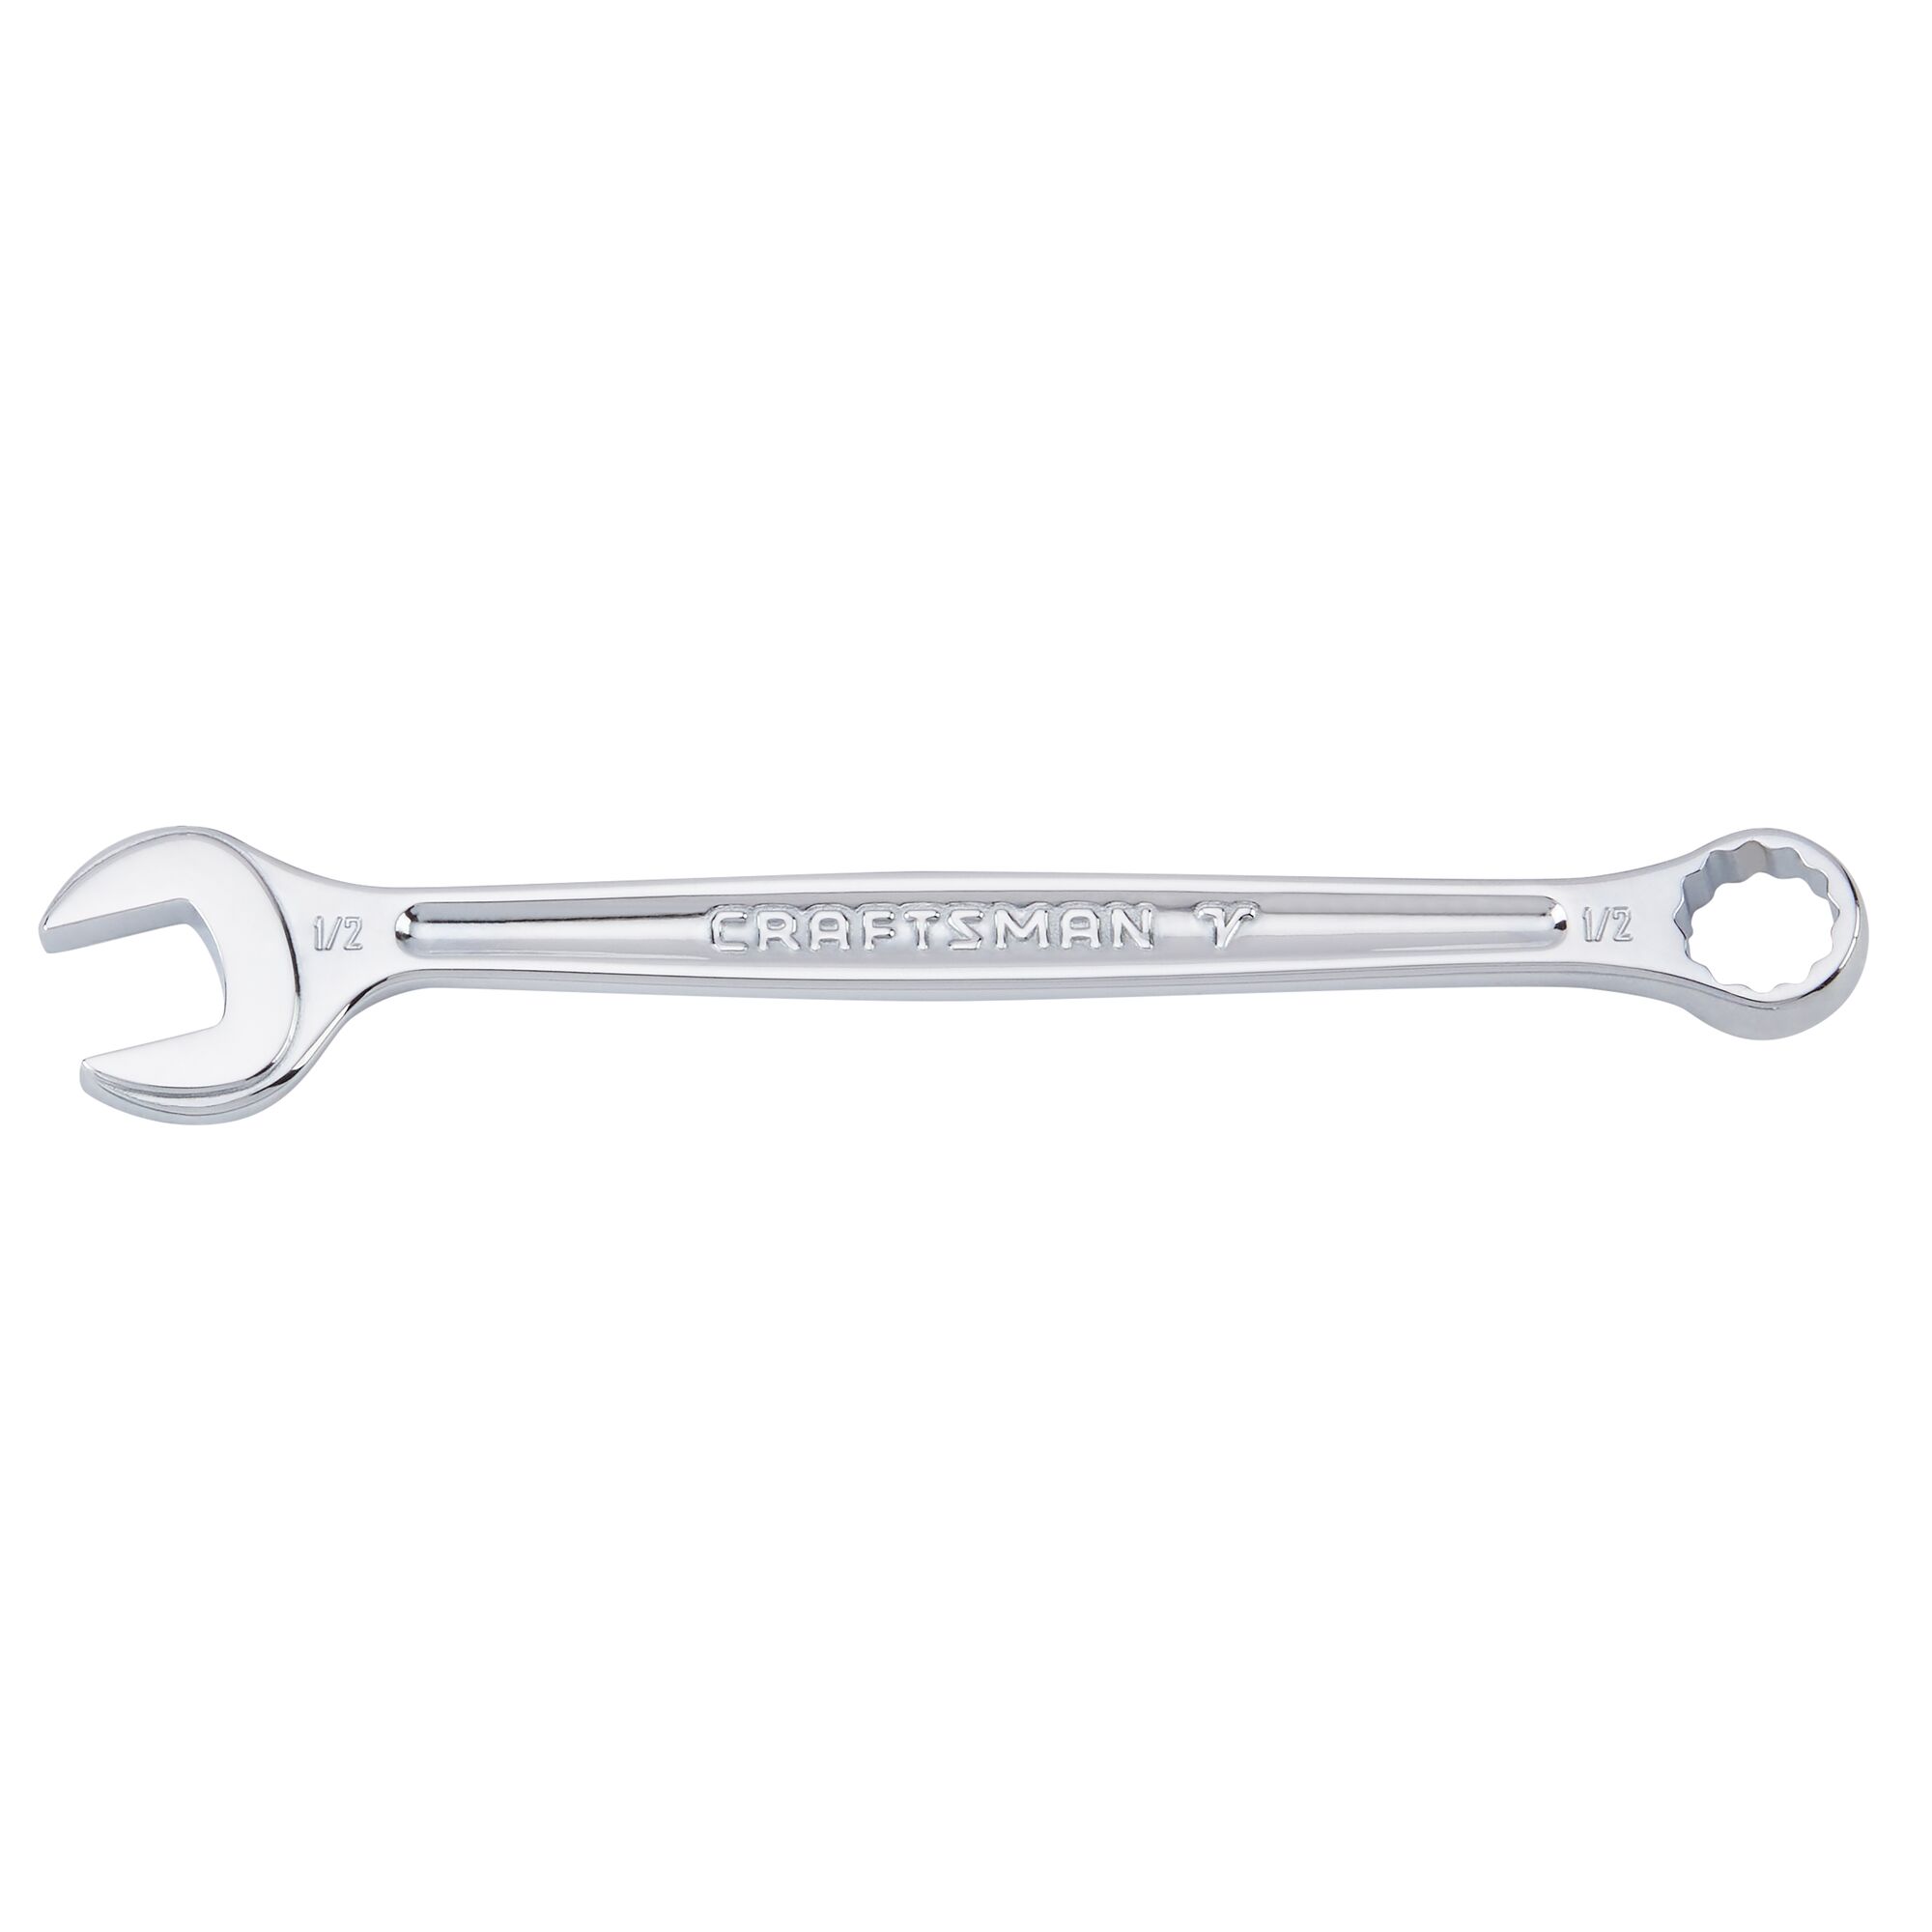 CRAFTSMAN V-SERIES Combo Wrench 1/2 